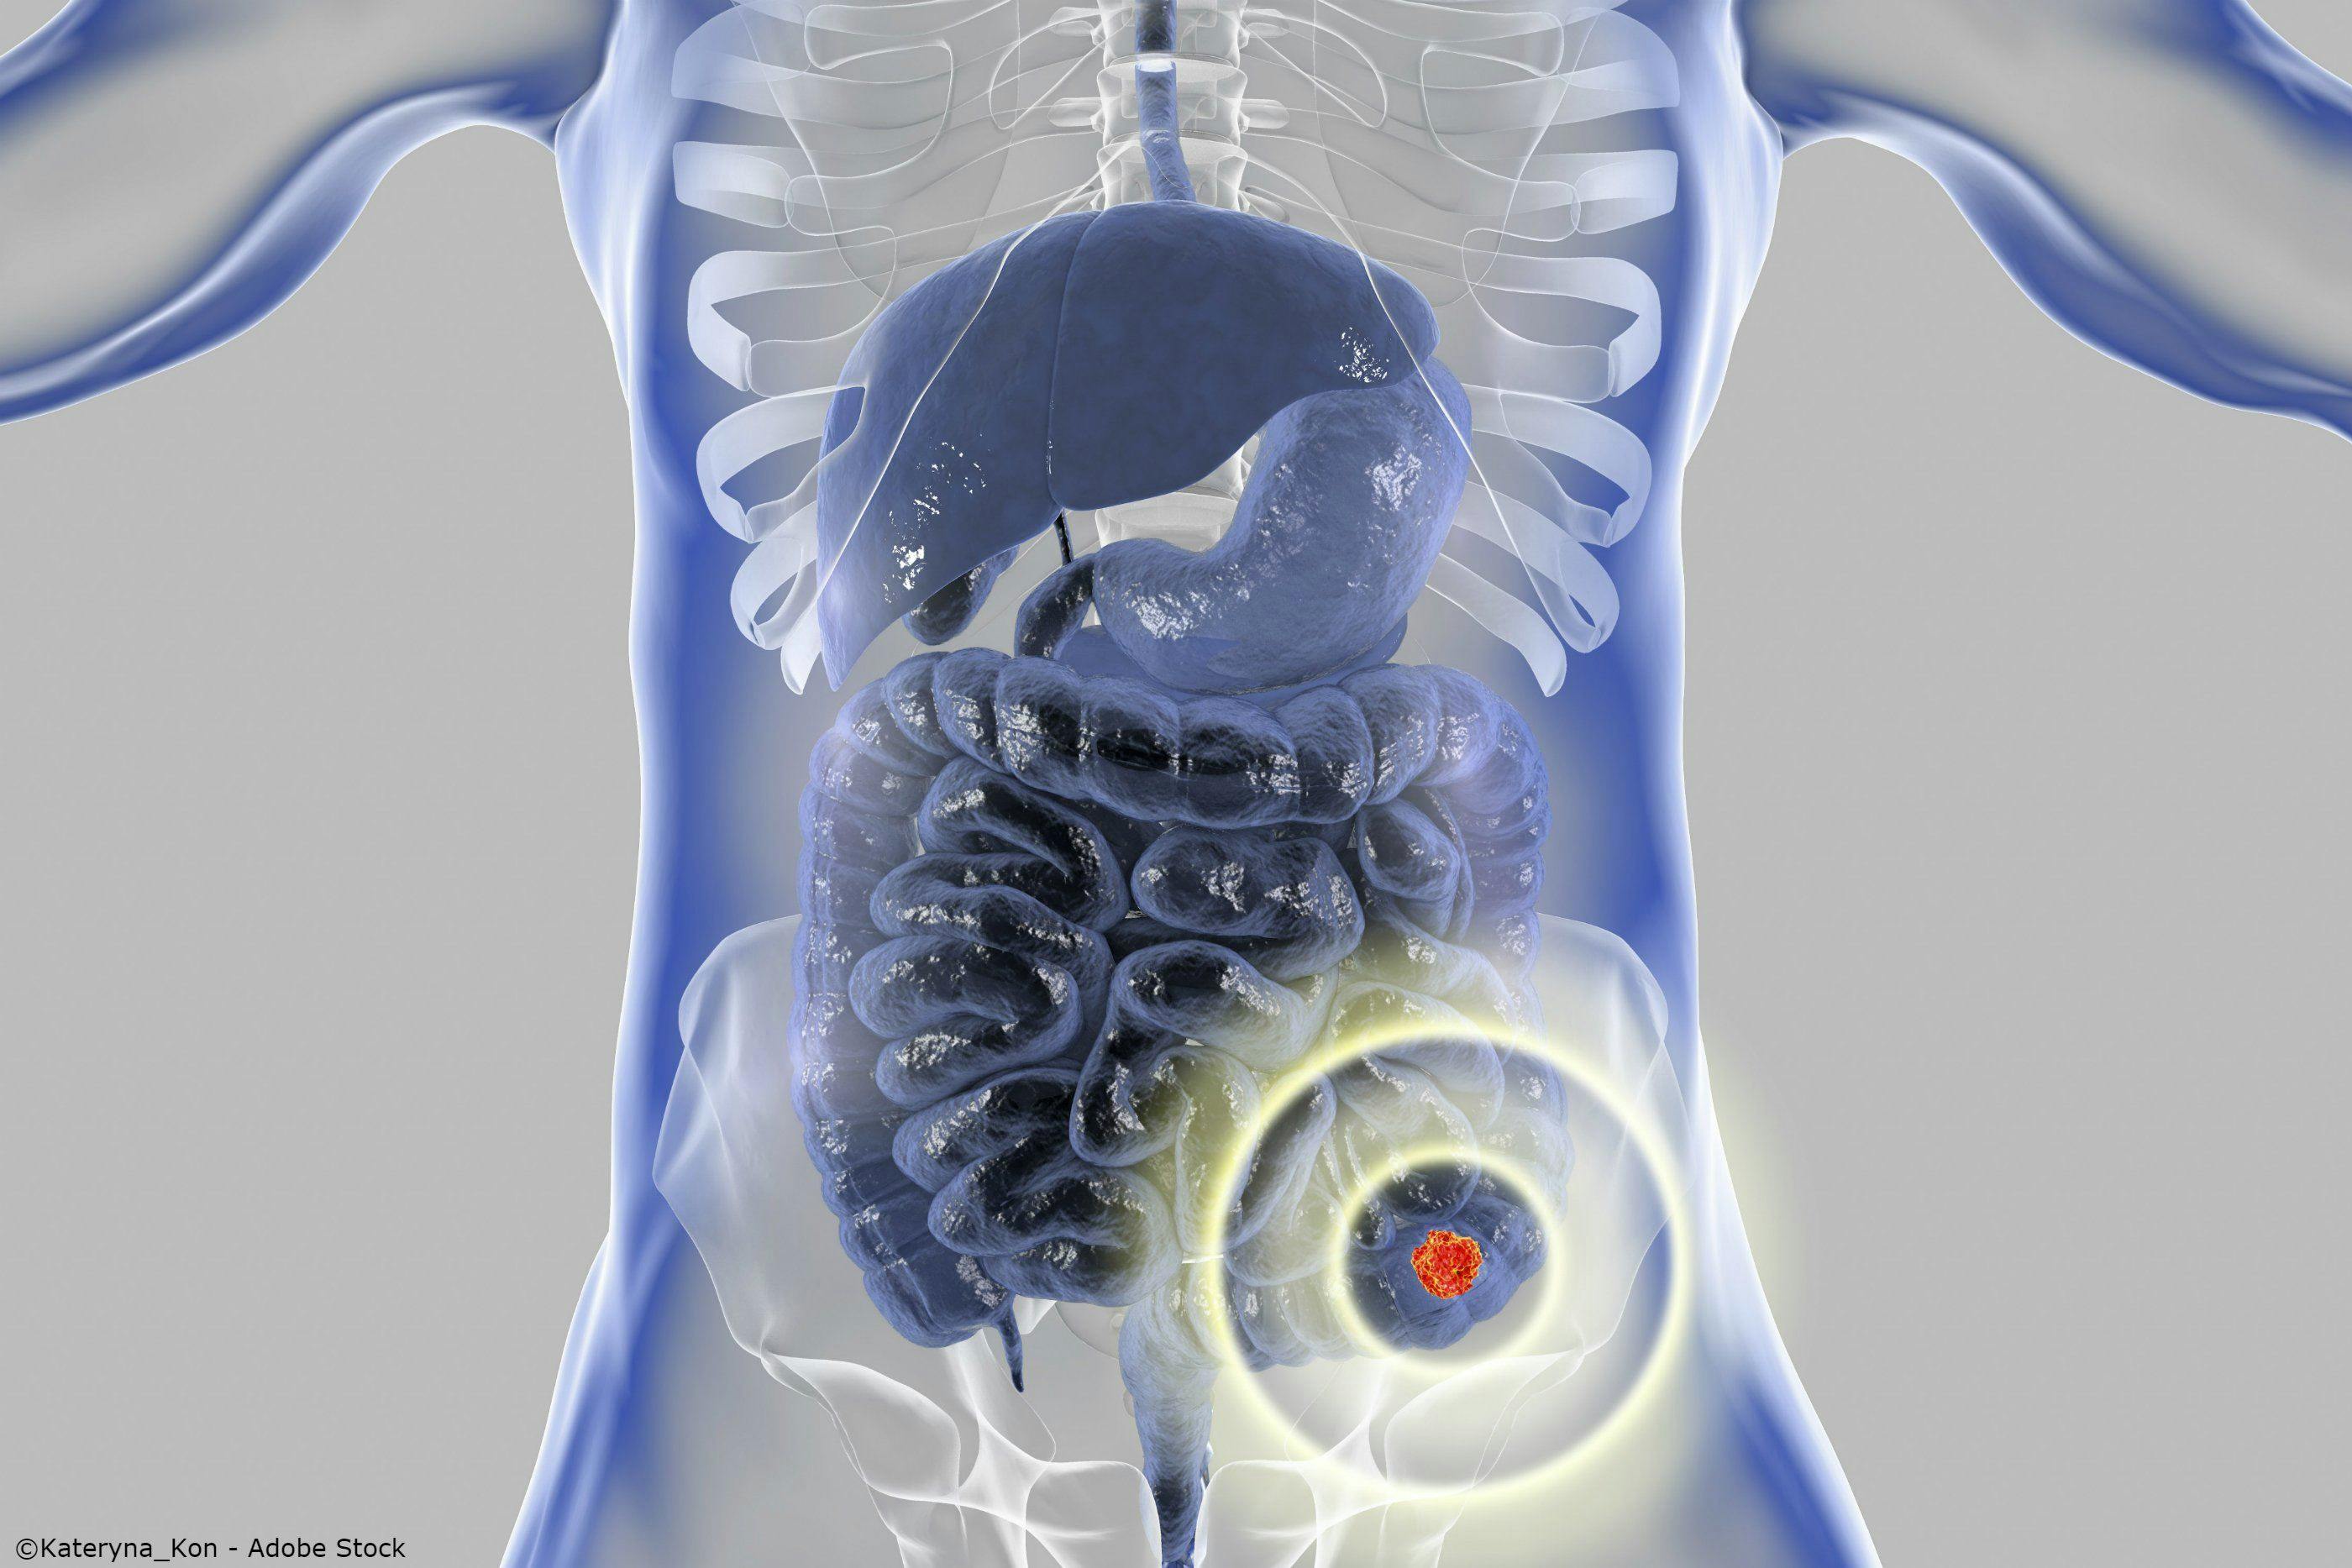 Improving Colorectal Cancer Screening For the Underserved